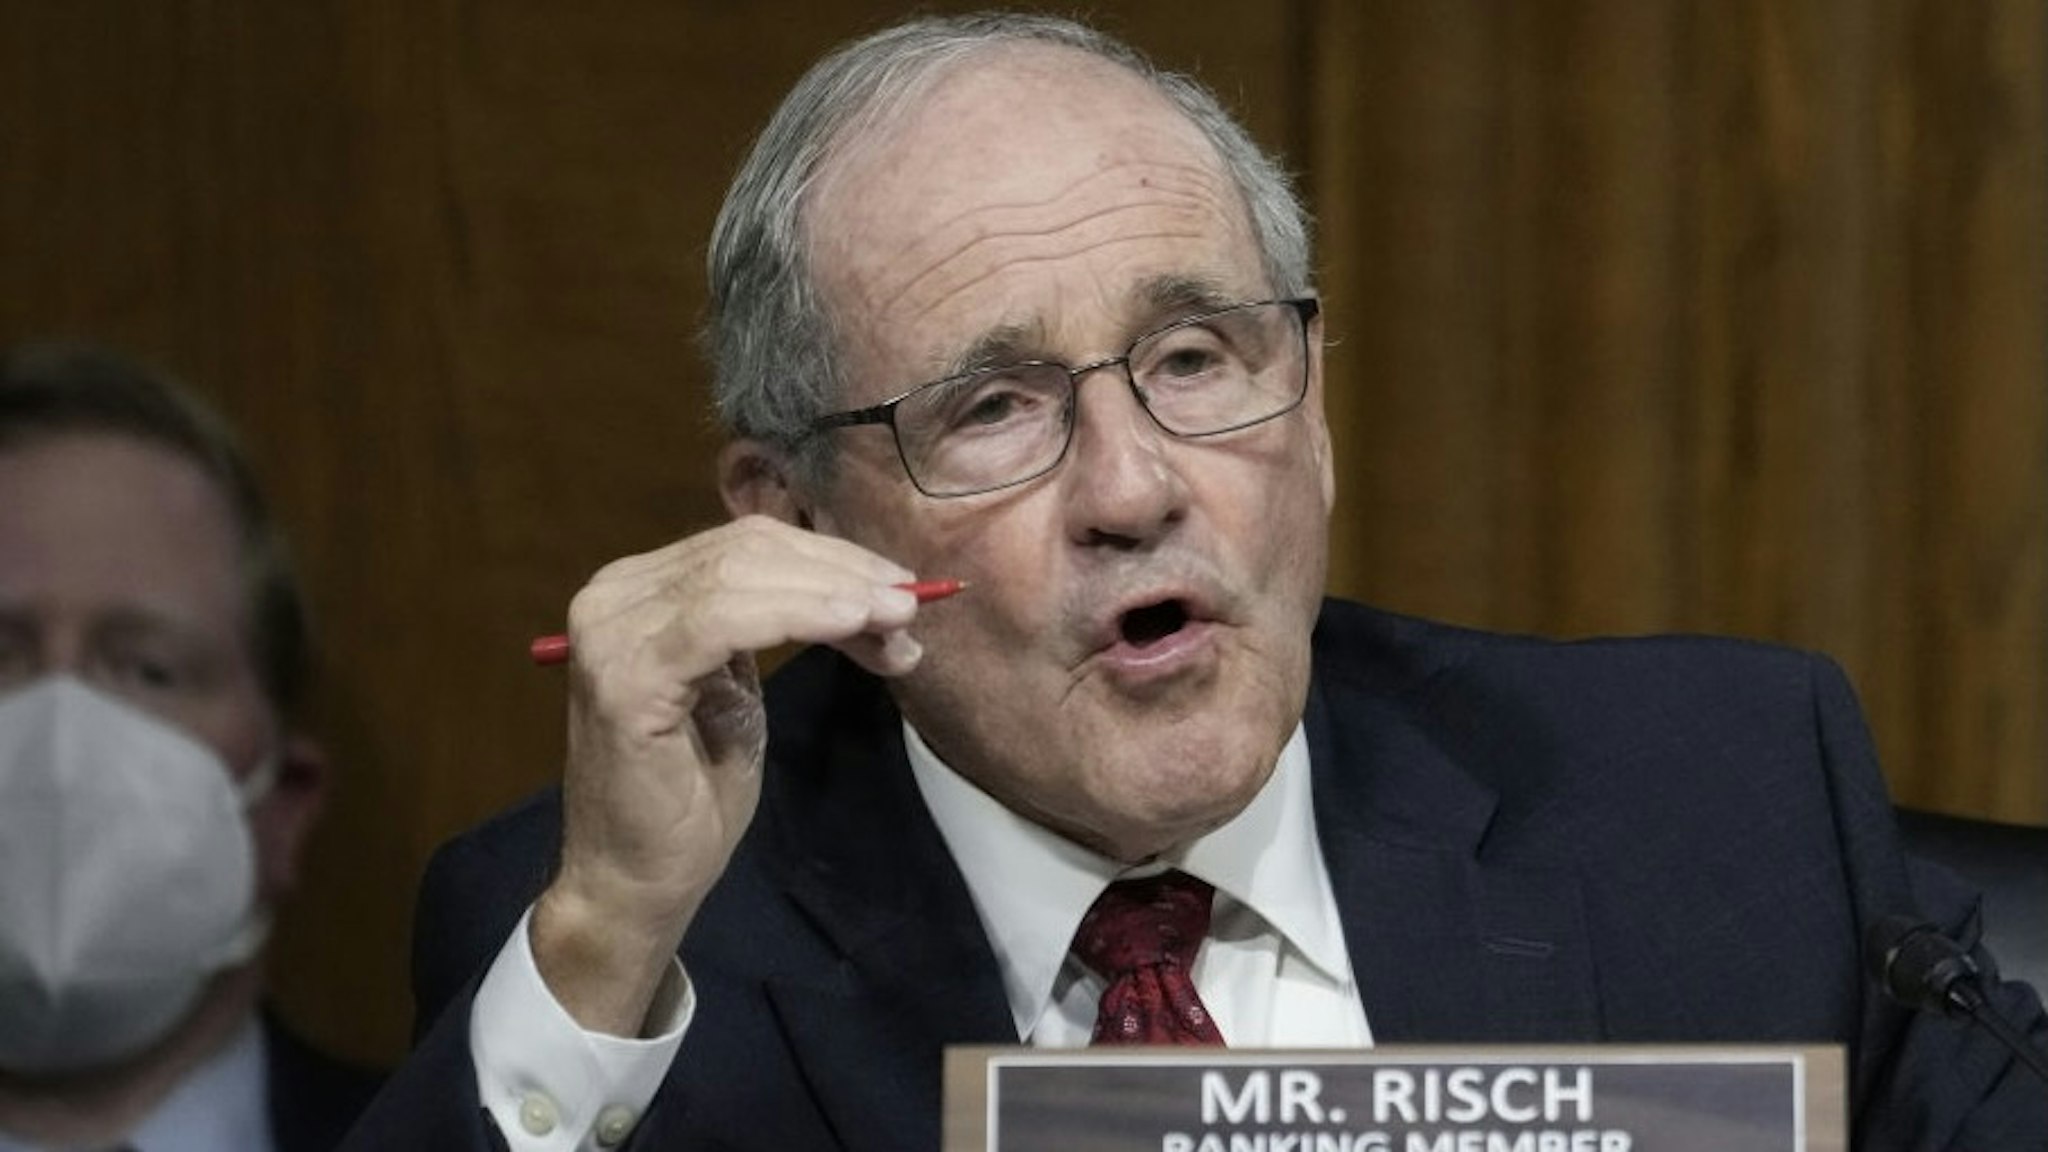 Secretary Of State Blinken Testifies Before Senate On Afghanistan Withdrawal Senator Jim Risch, a Republican from Idaho and ranking member of the Senate Foreign Relations Committee, speaks during a hearing in Washington, D.C., U.S., on Tuesday, Sept. 14, 2021.